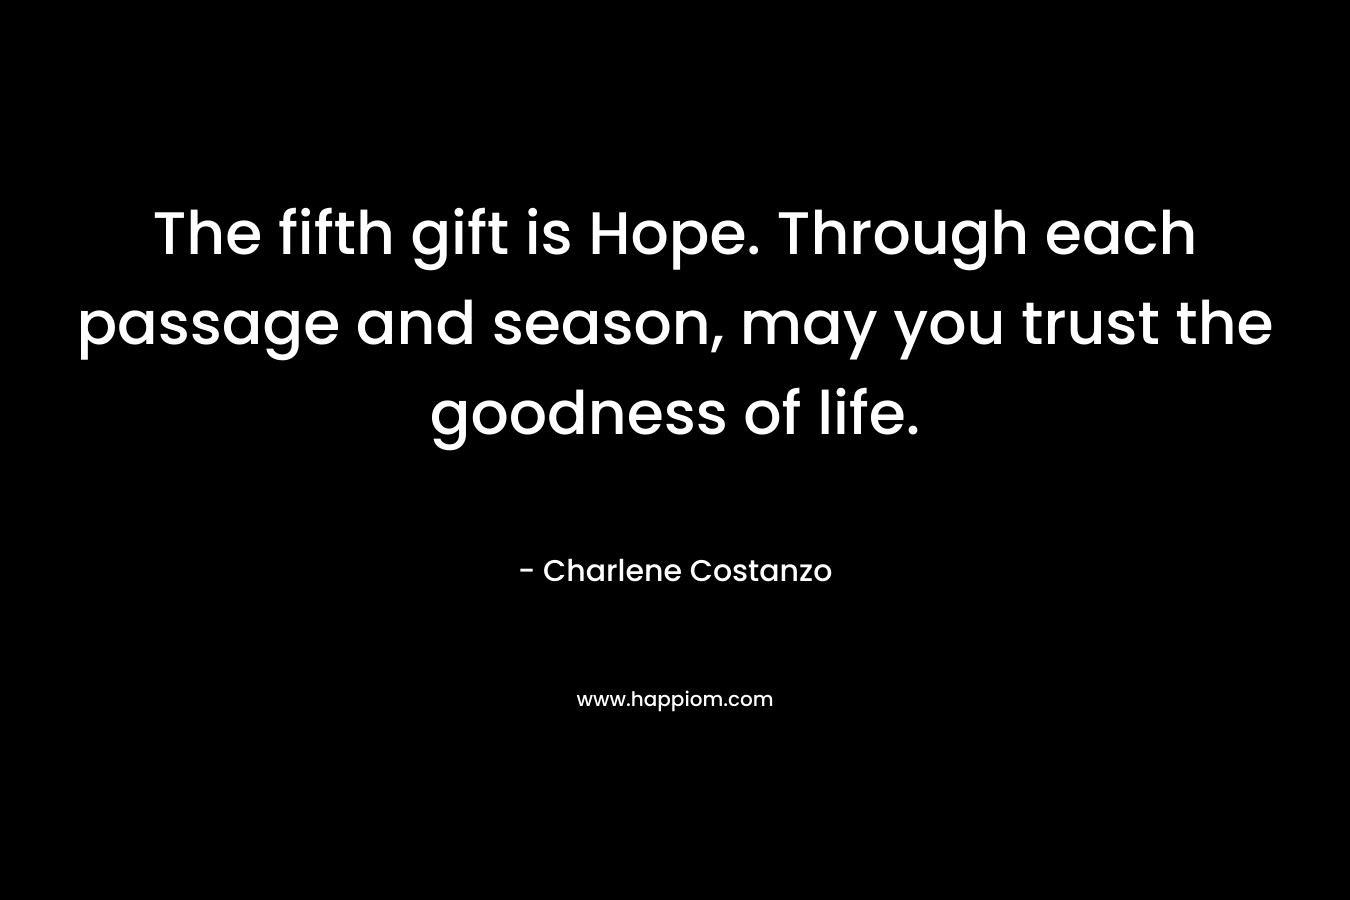 The fifth gift is Hope. Through each passage and season, may you trust the goodness of life.